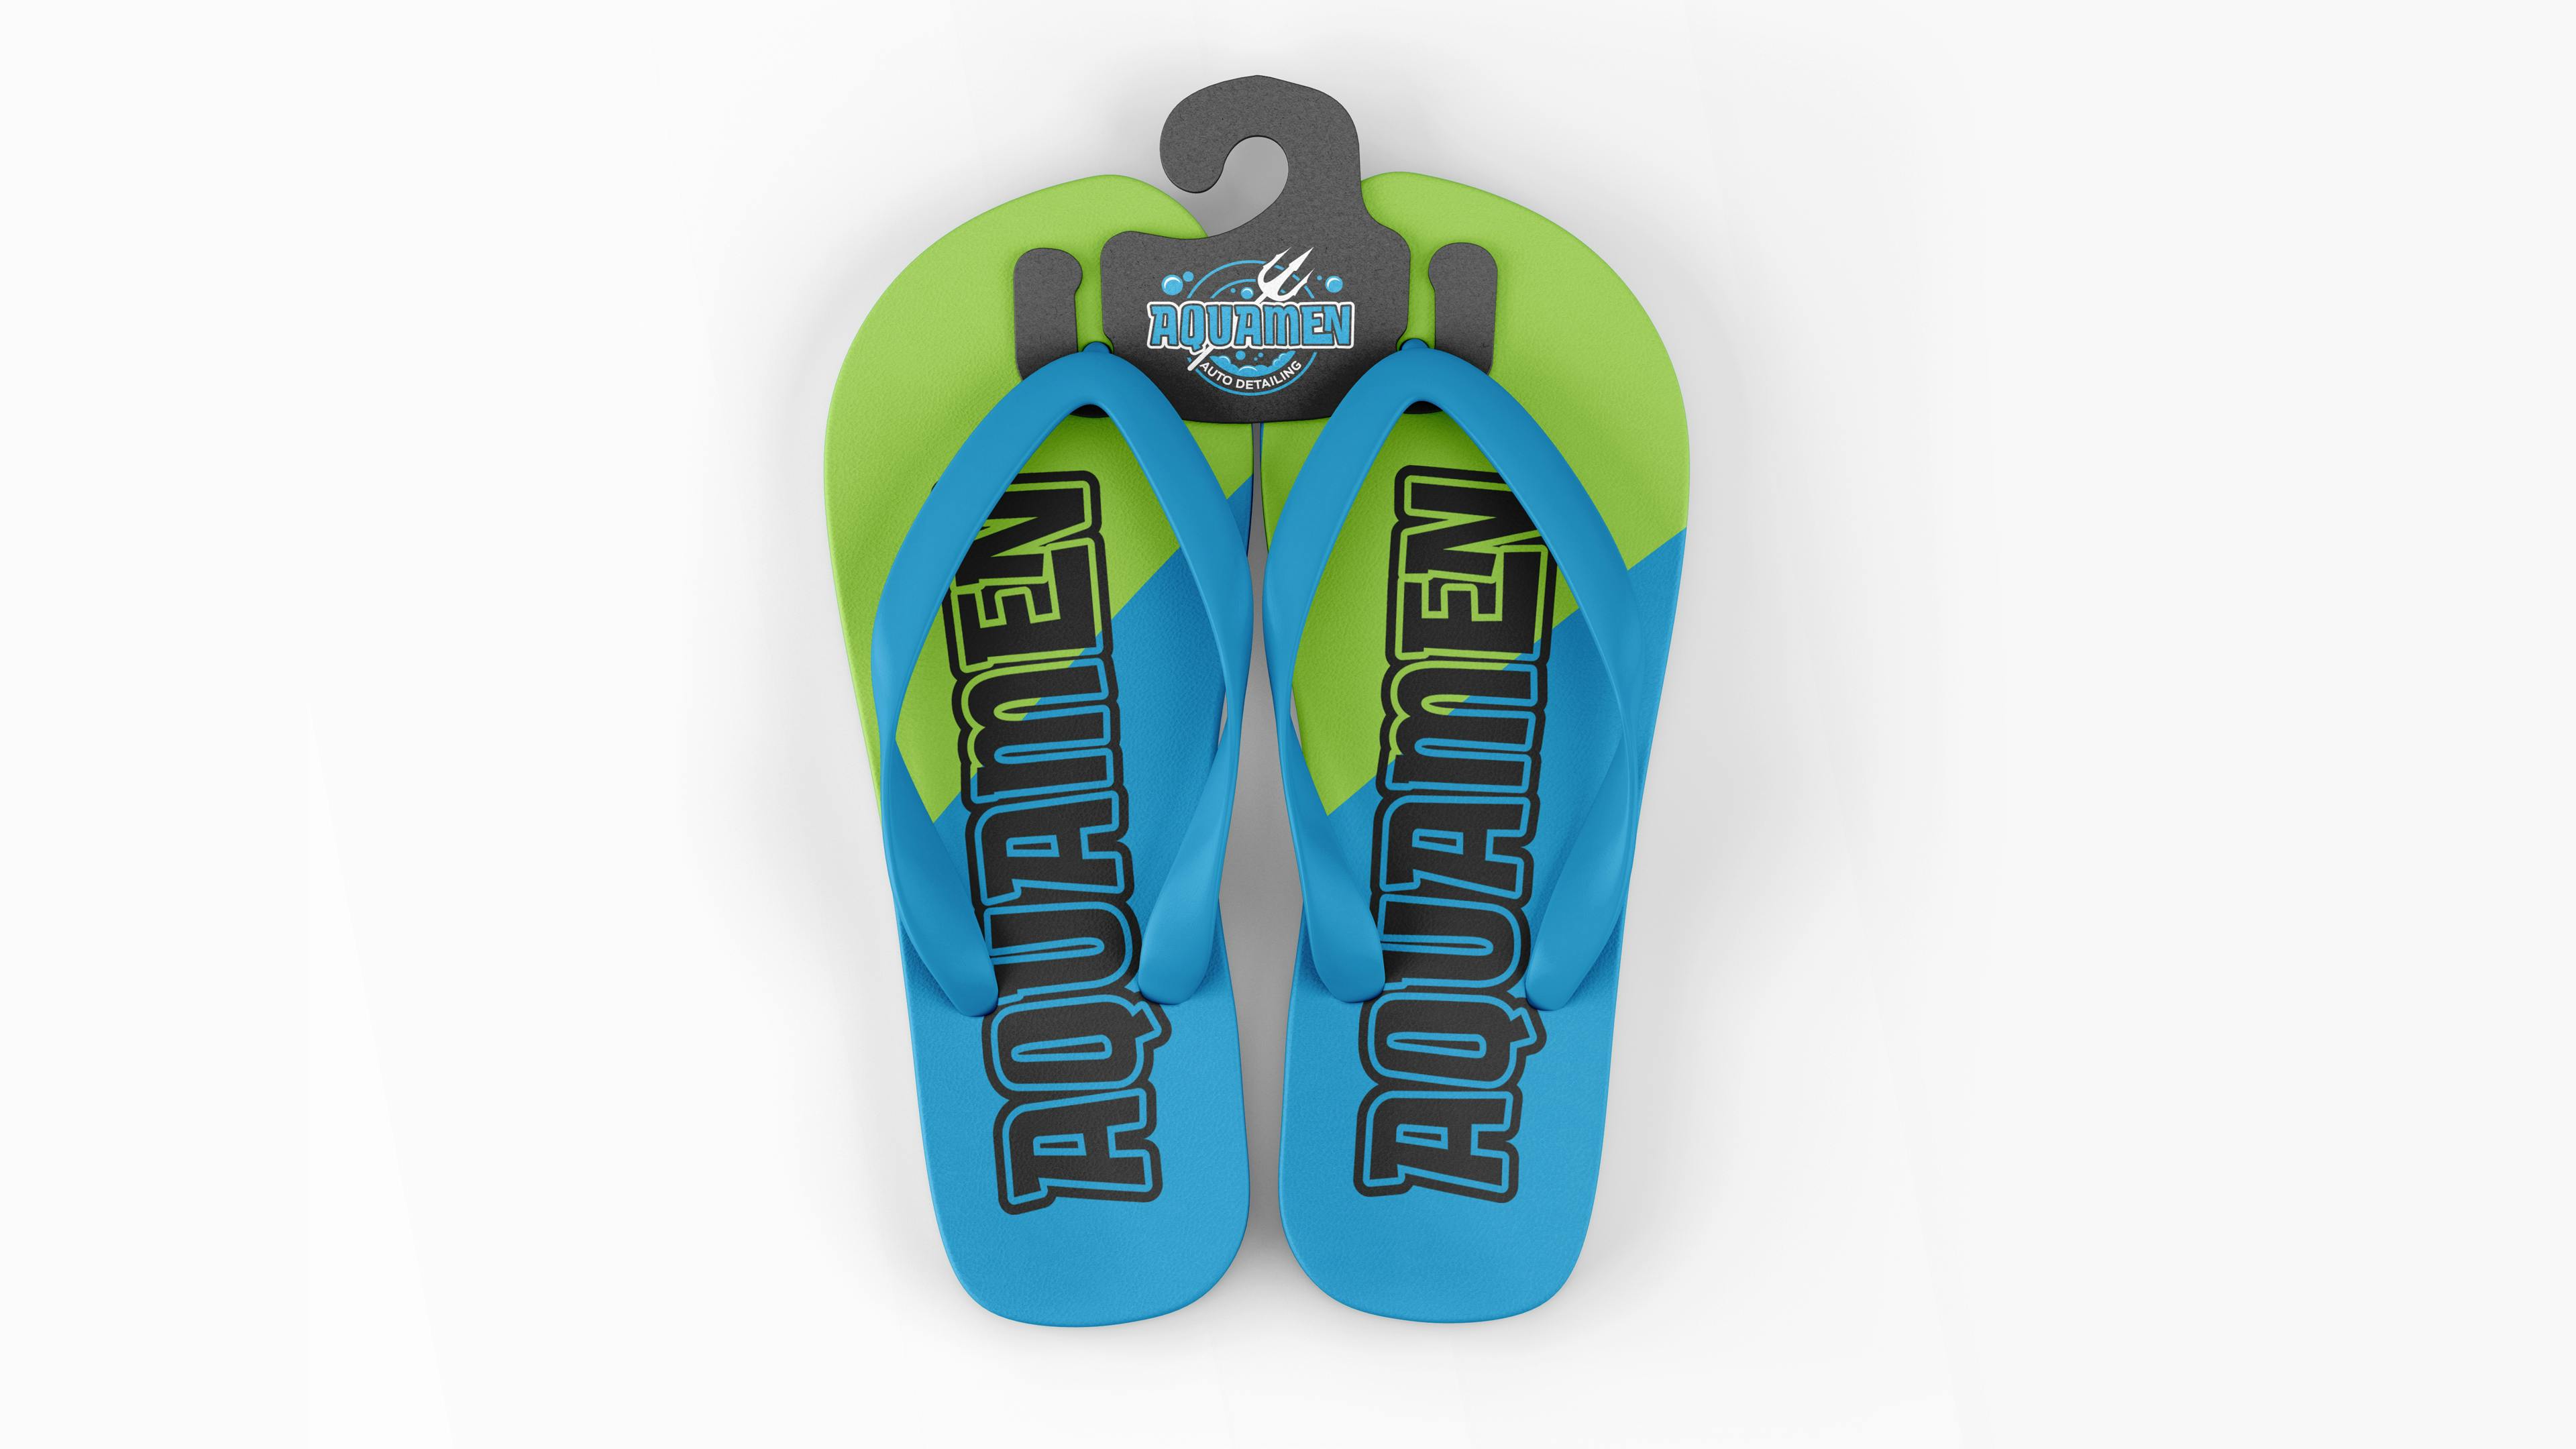 Sandals for Aquamen that are green and blue with the words "Aquamen"